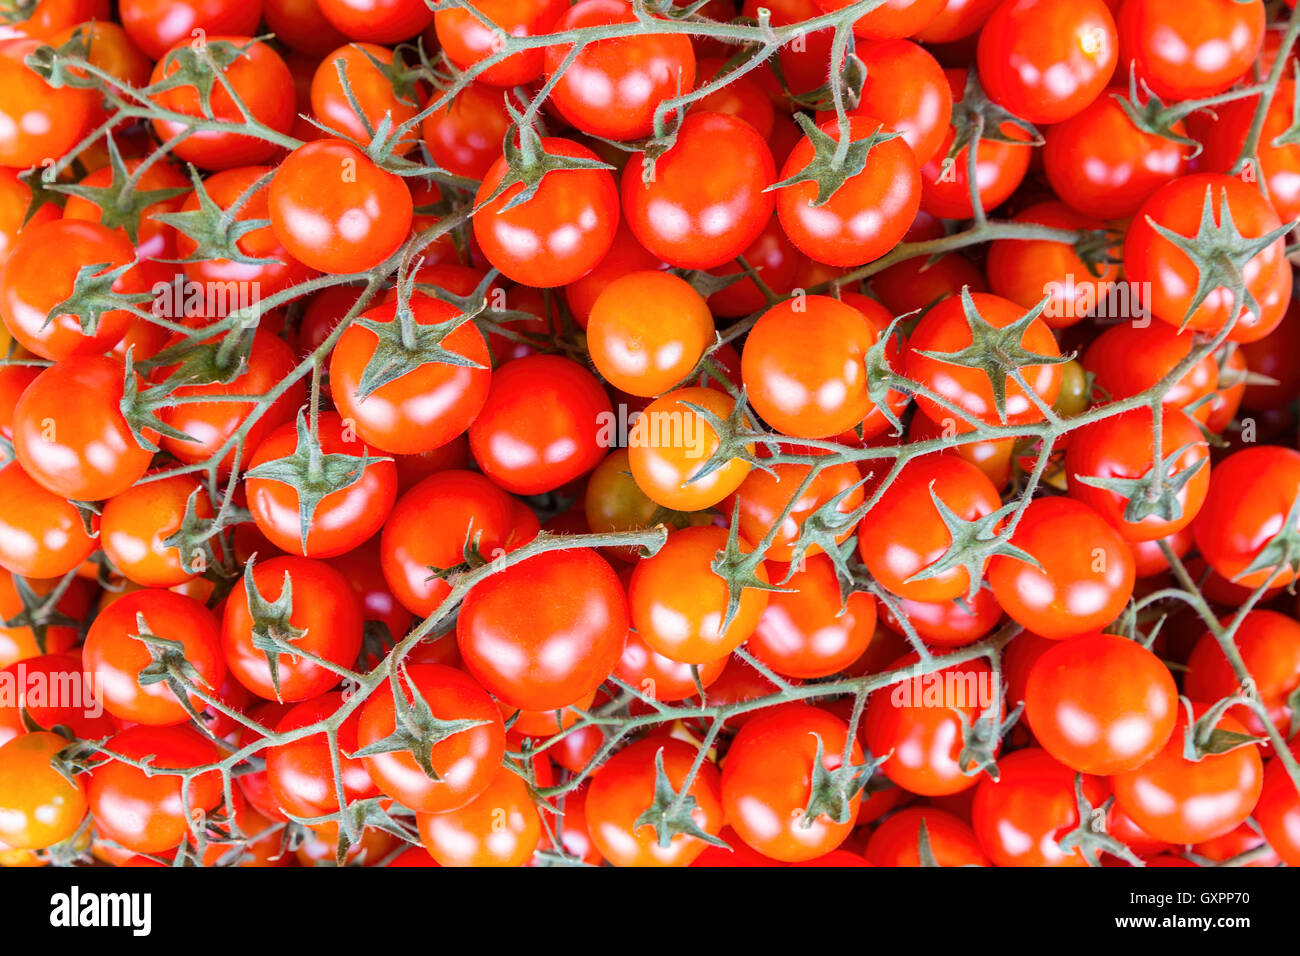 Many bunches of red vine tomatoes with stems or stalks Stock Photo